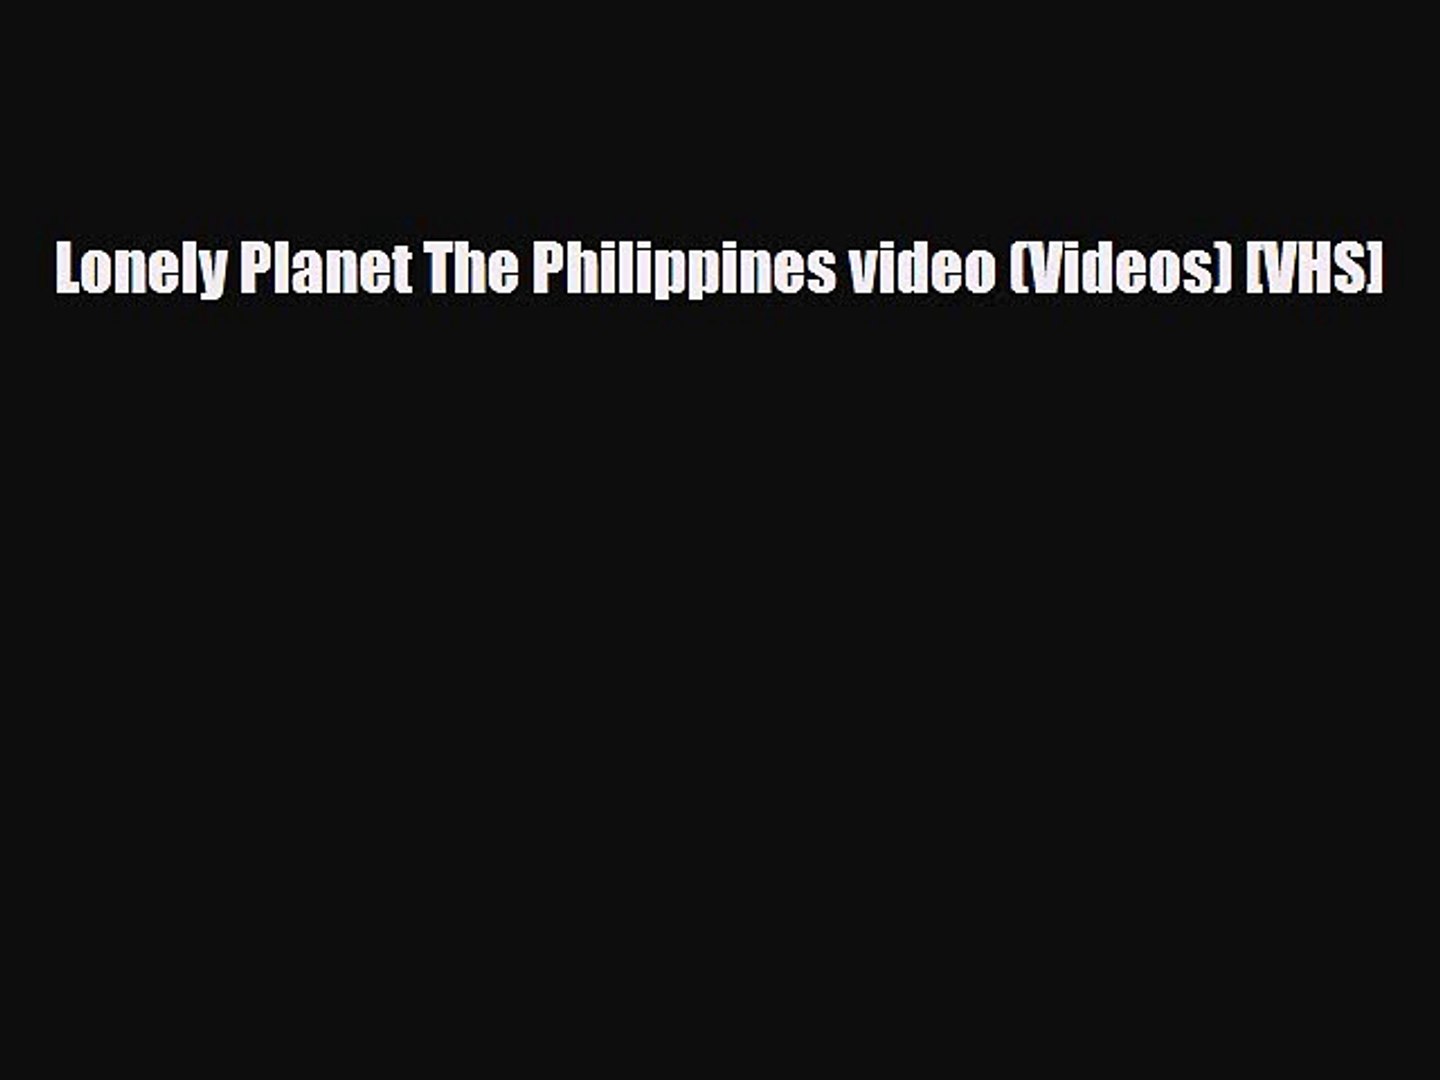 Download Lonely Planet The Philippines video (Videos) [VHS] Free Books